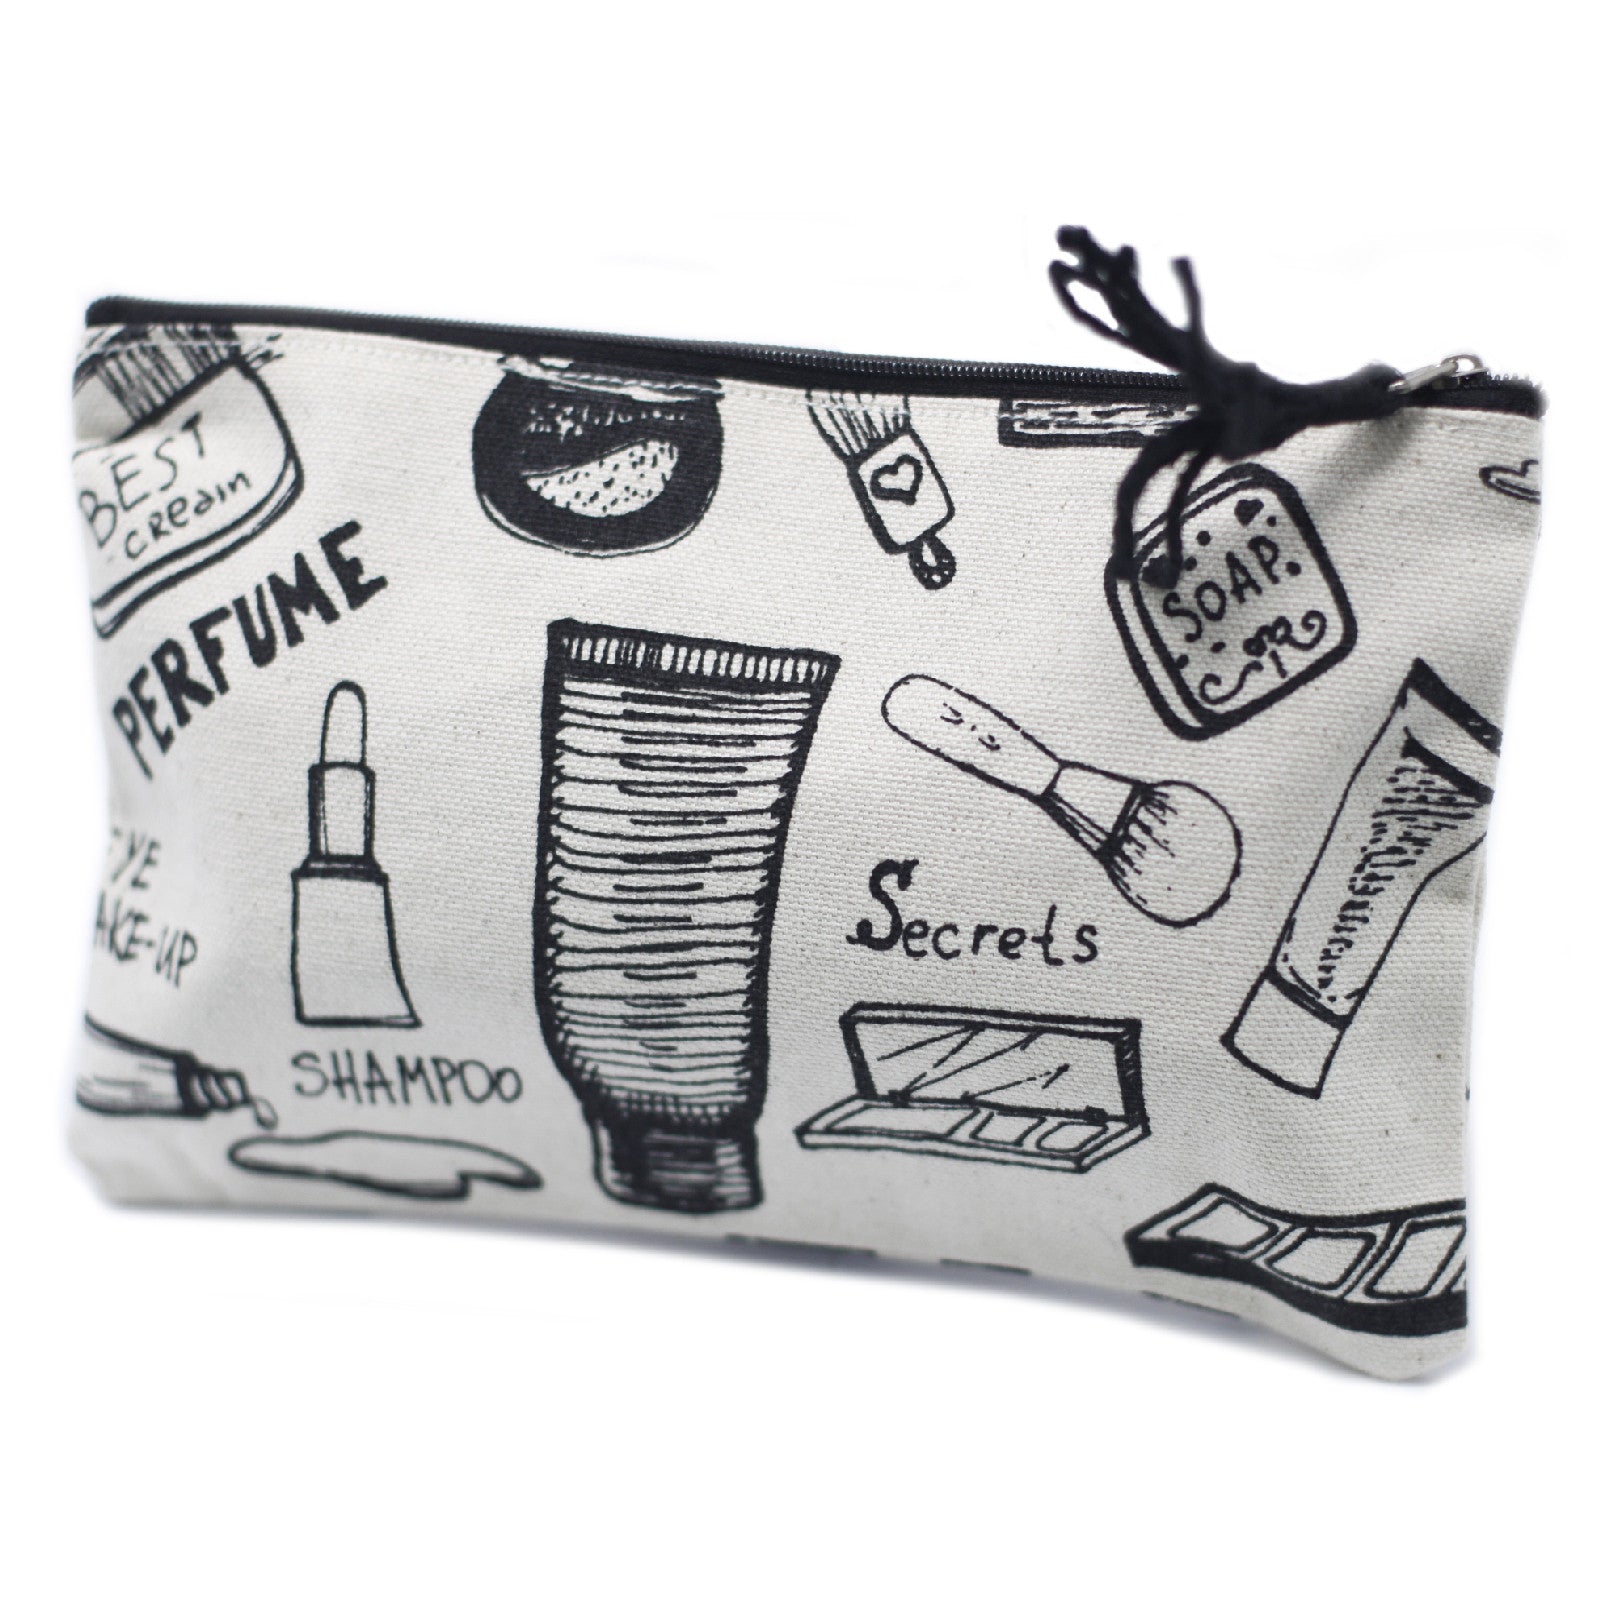 View Classic Zip Pouch Gorgeous information